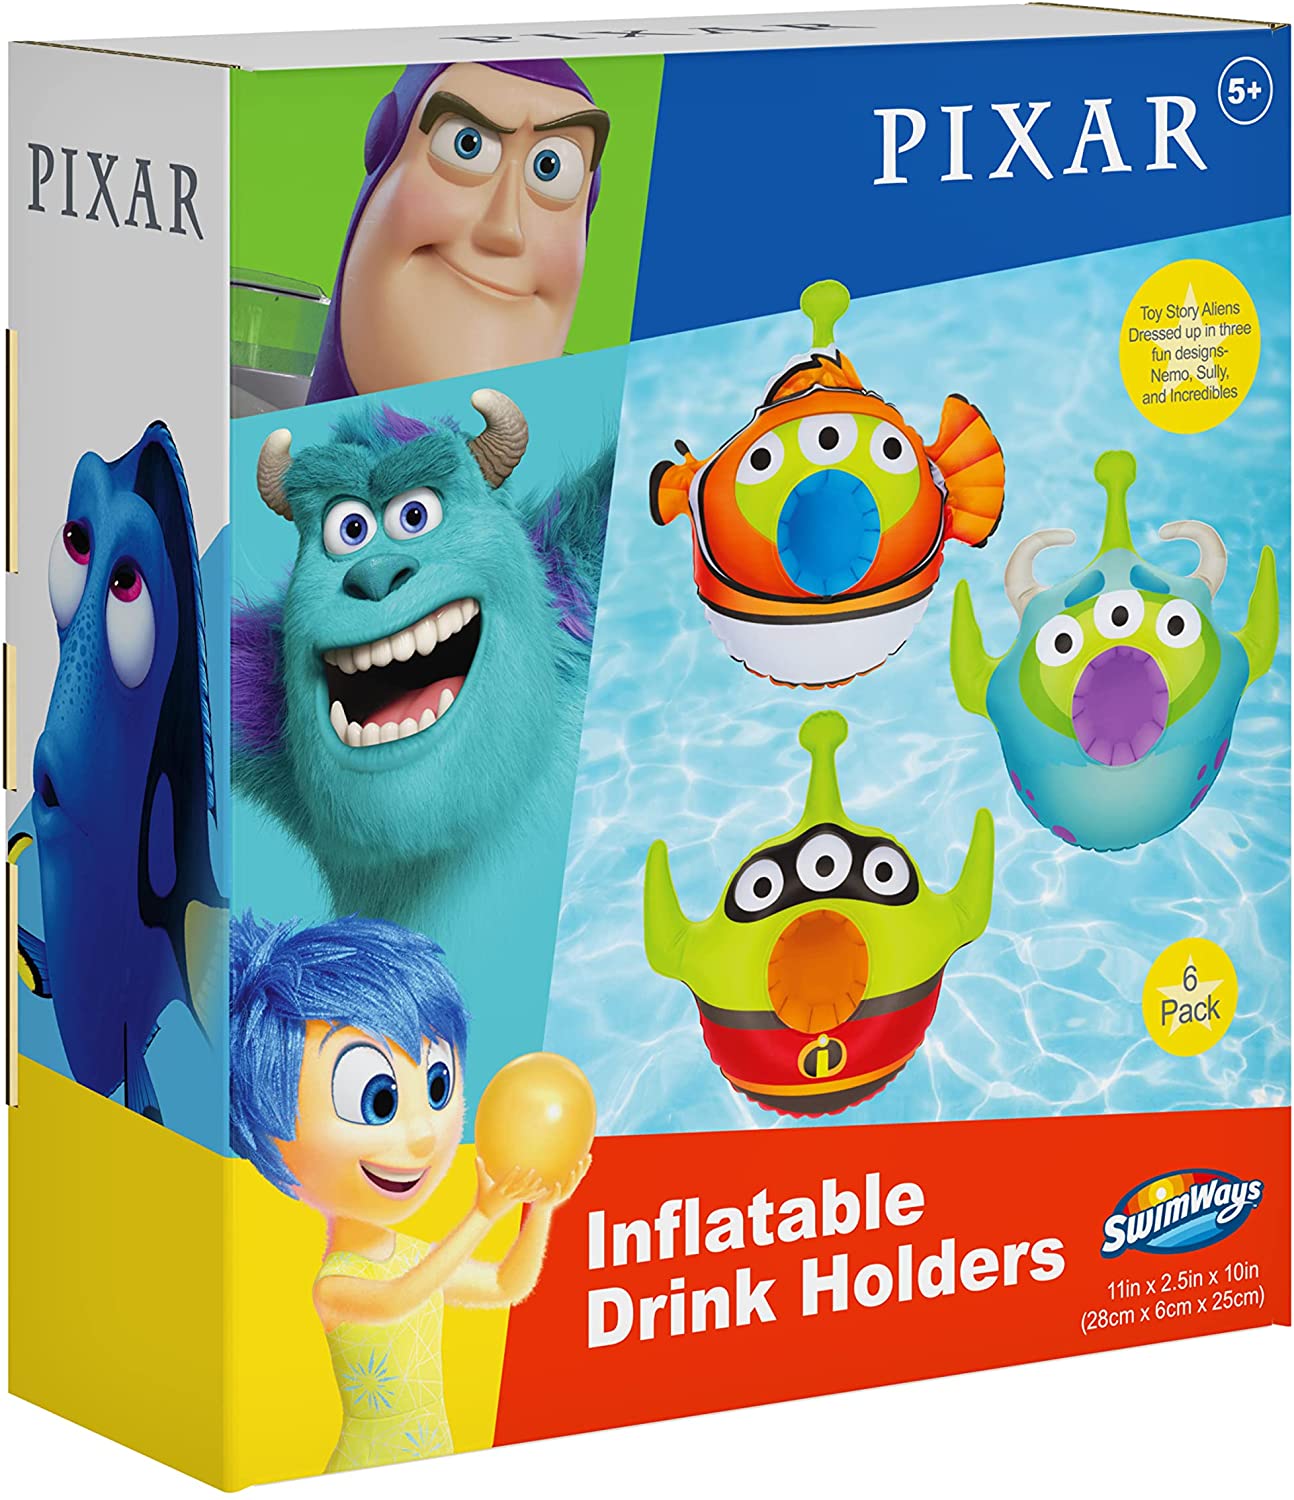 Disney Pixar Various SwimWays Inflatable Pool Floats from $5.99 + Free Ship w/Prime